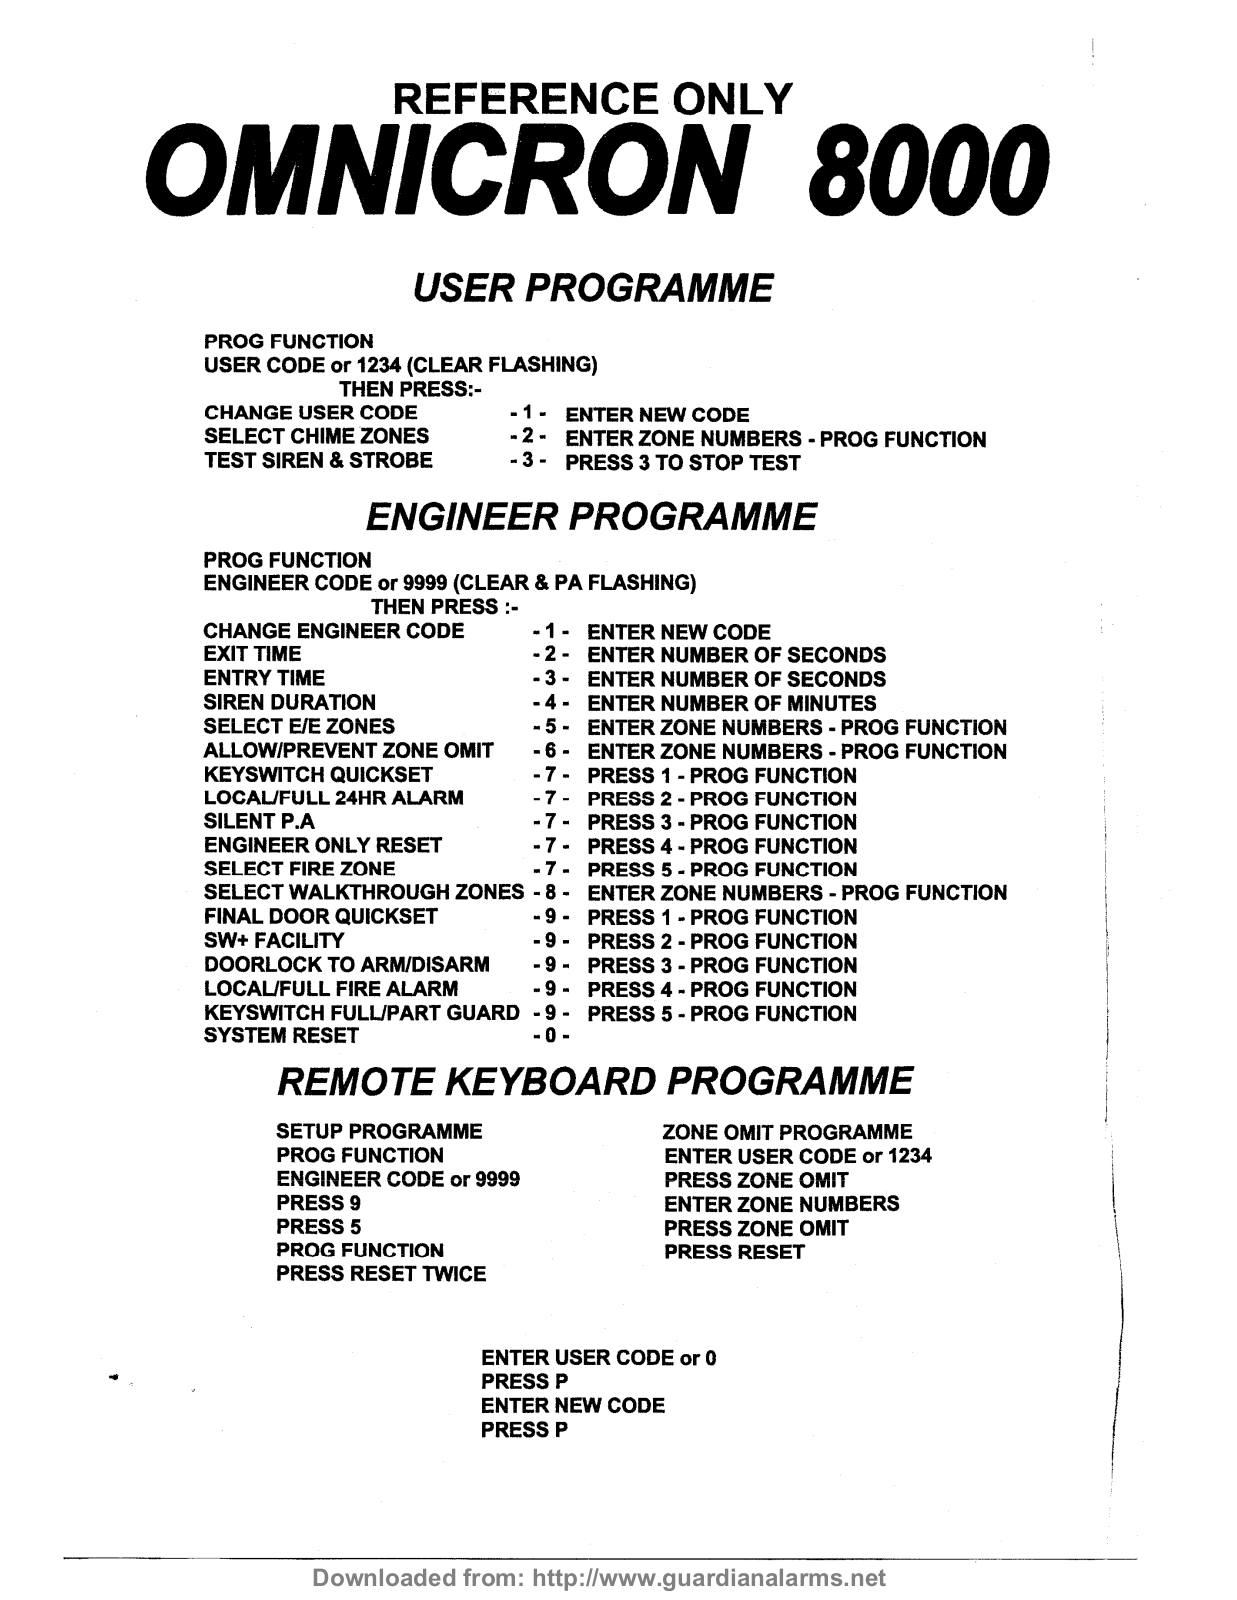 A1 security OMNICRON 8000 QUICK START GUIDE